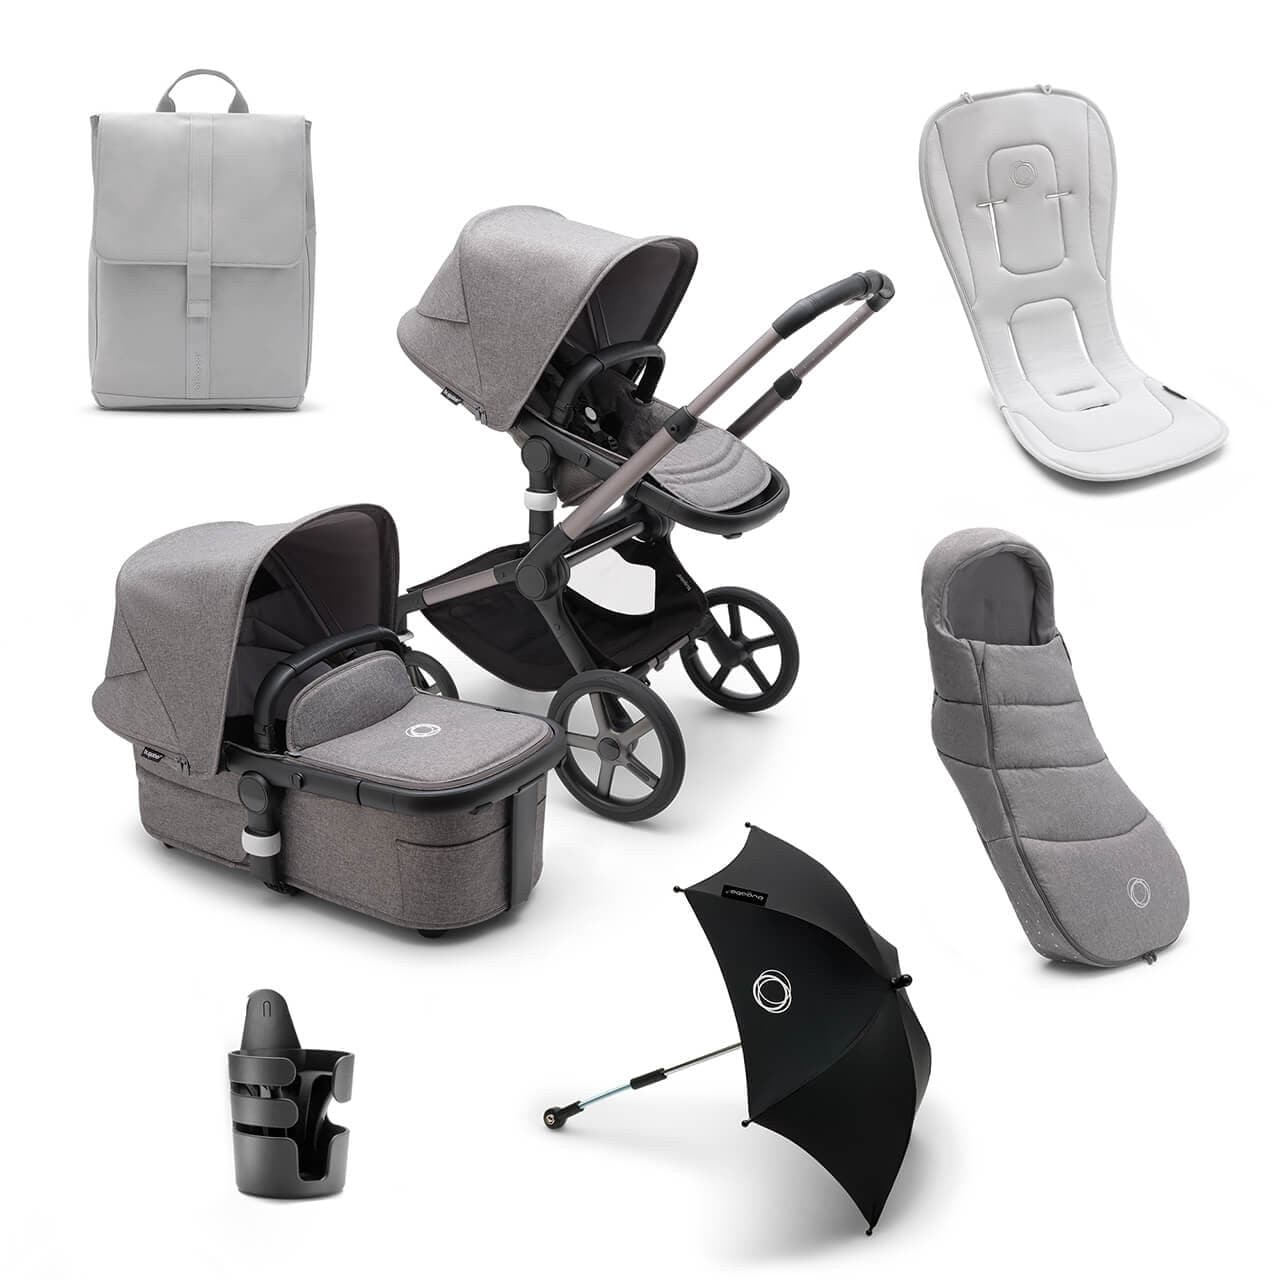 Bugaboo Fox 5 Essential Travel System Bundle - Graphite/Grey Melange - For Your Little One